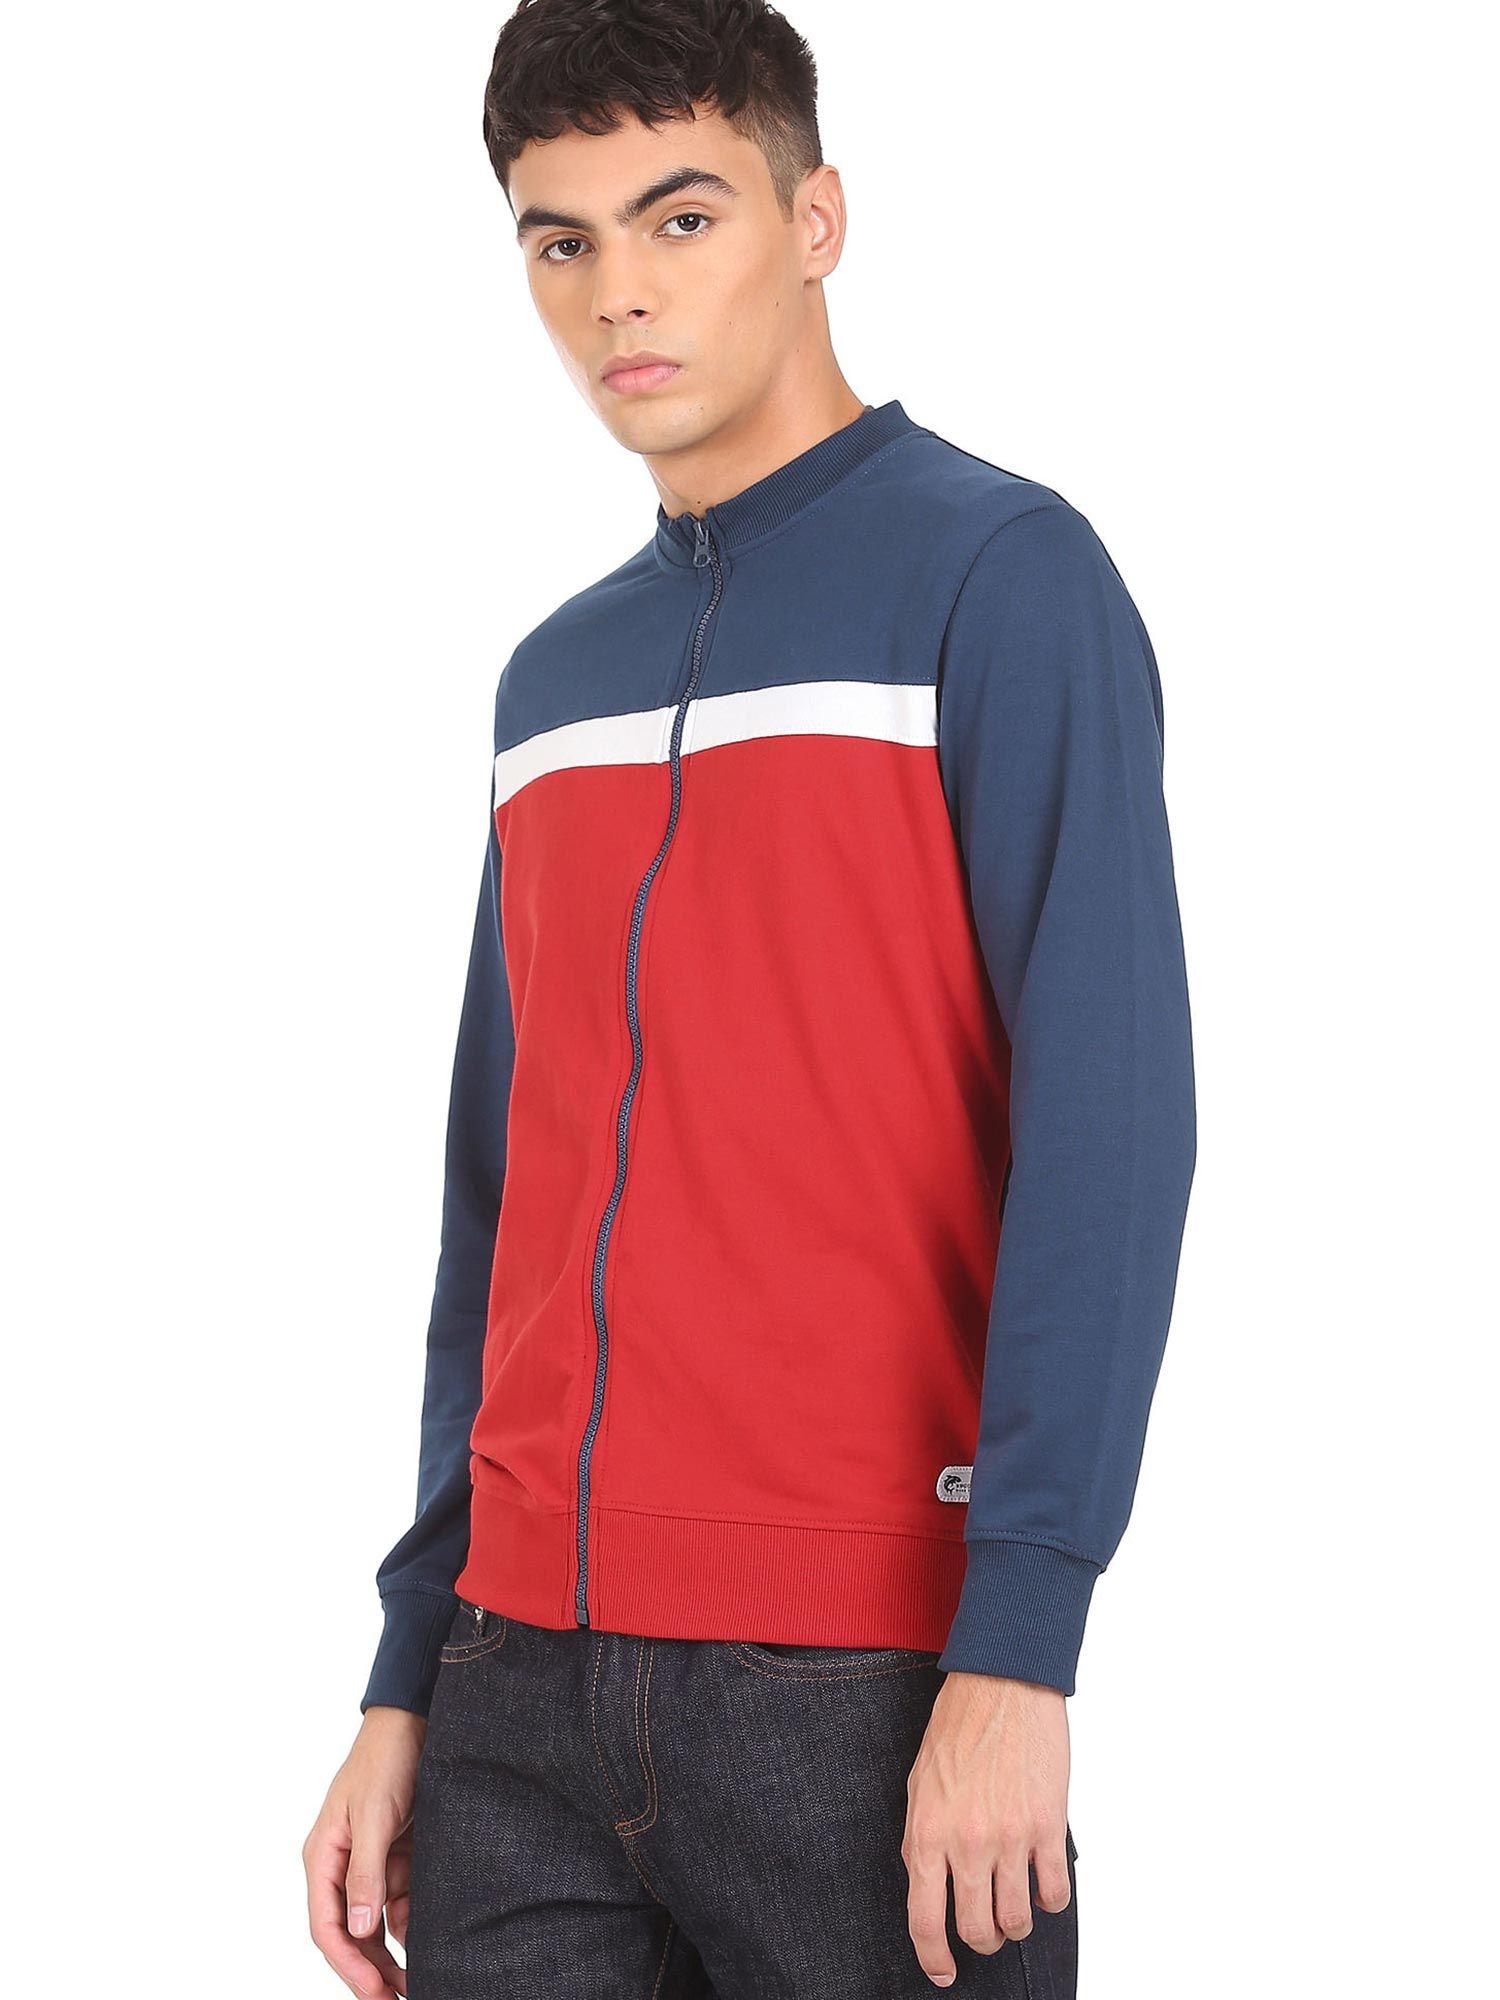 men-navy-and-red-long-sleeve-colour-blocked-sweatshirt